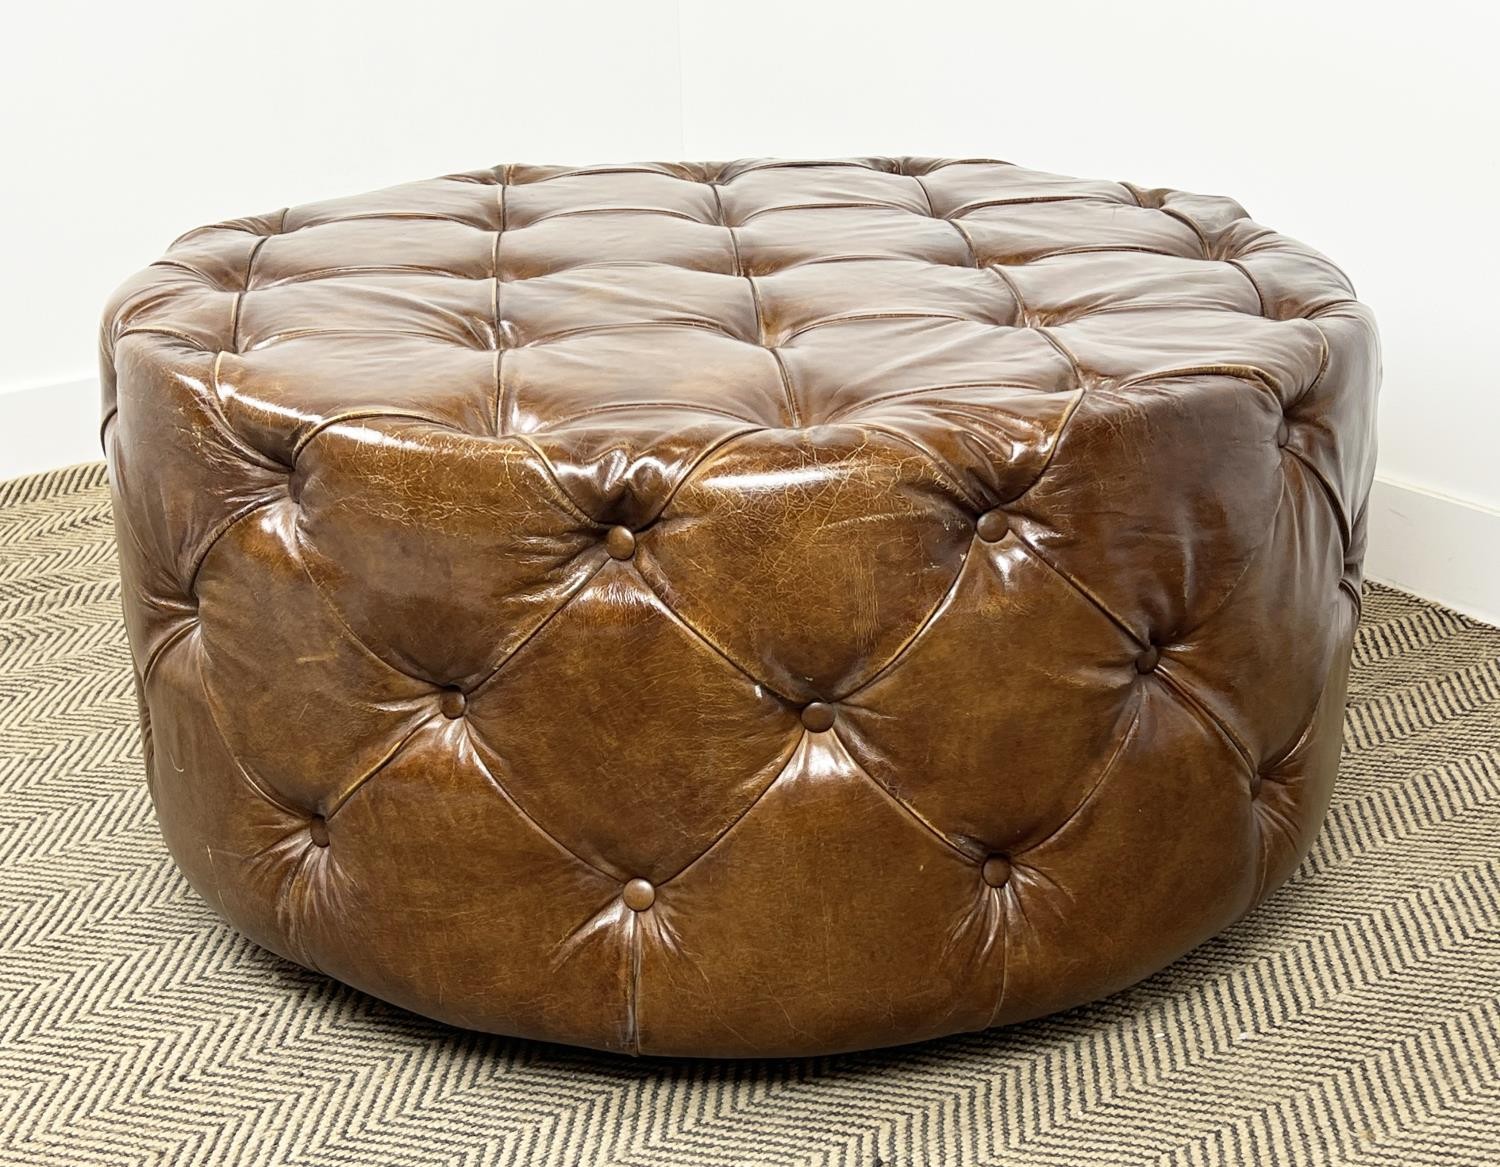 FOOTSTOOL, revolving buttoned hand dyed tanned leather, 55cm H x 98cm diam. - Image 5 of 5